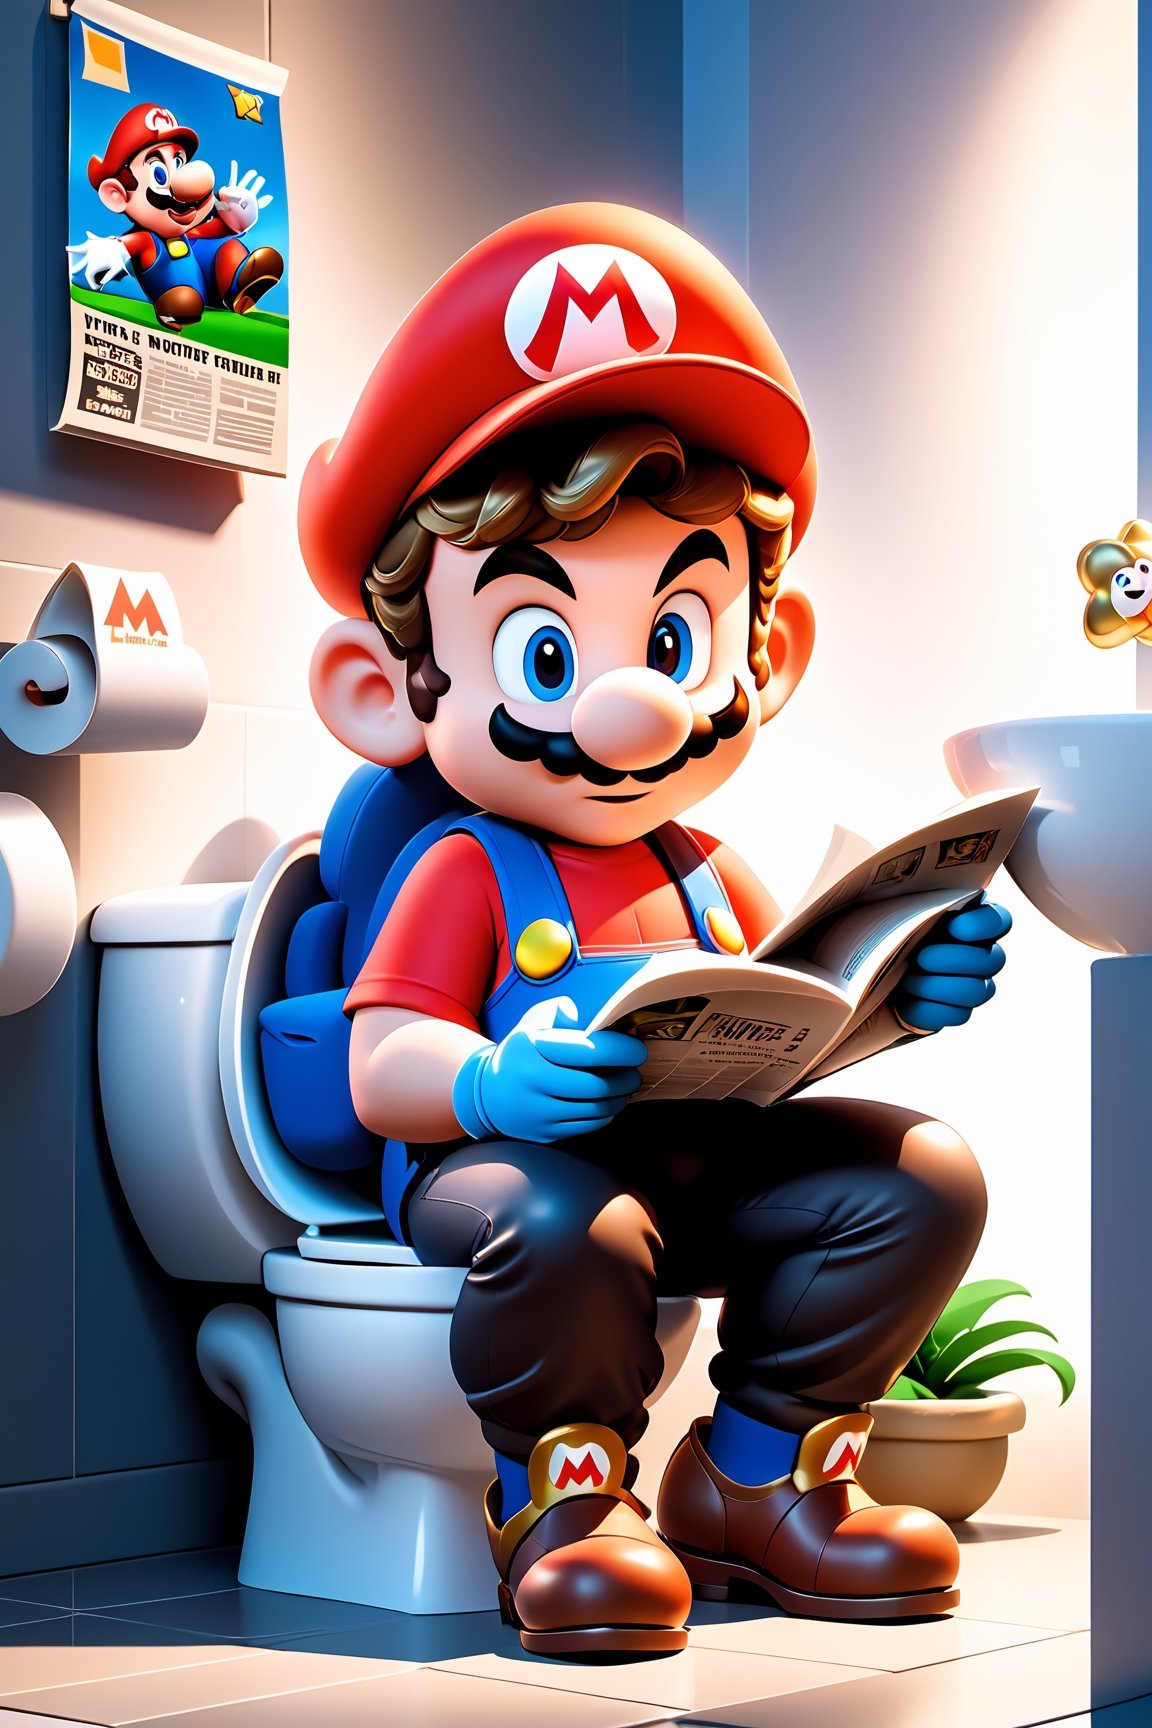 concept art pixar,3d style,toon,masterpiece,best quality,Super Mario style  3D cinematic film.(caricature:0.2). 4k, highly detailed,Man Sitting on Toilet and Reading Newspaper . Vibrant, cute, cartoony, fantasy, playful, reminiscent of Super Mario series